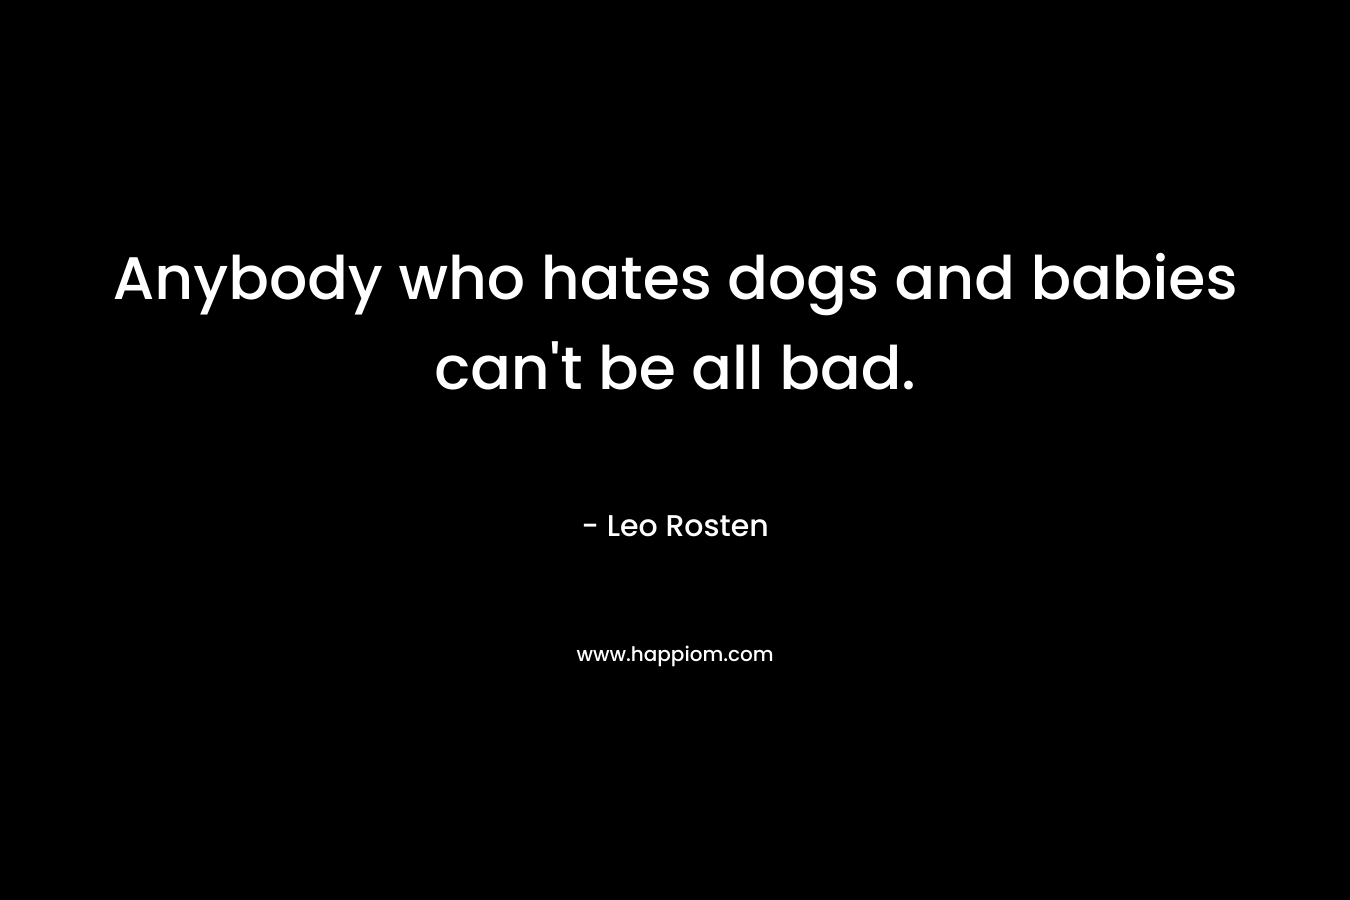 Anybody who hates dogs and babies can’t be all bad. – Leo Rosten